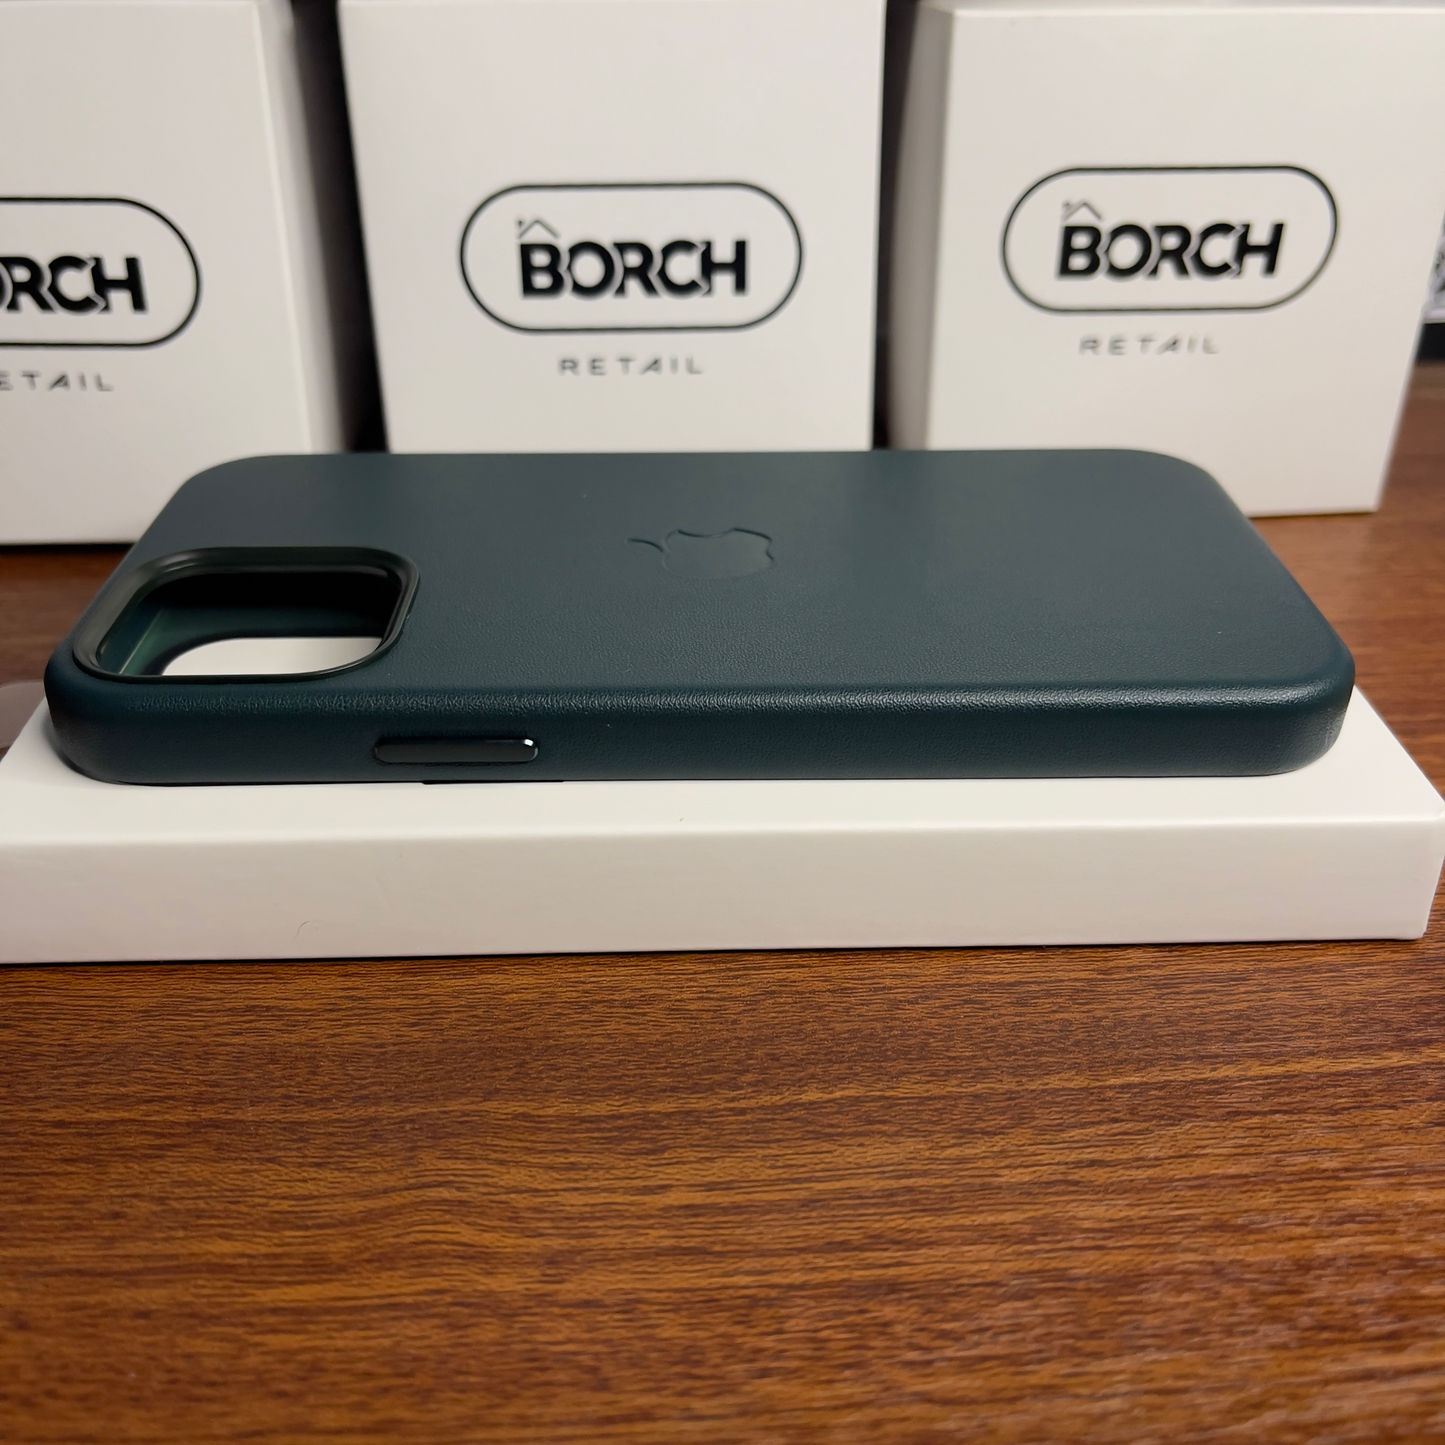 MagSafe Leather Case | iPhone 12 Normal | iPhone 12 Pro | Green